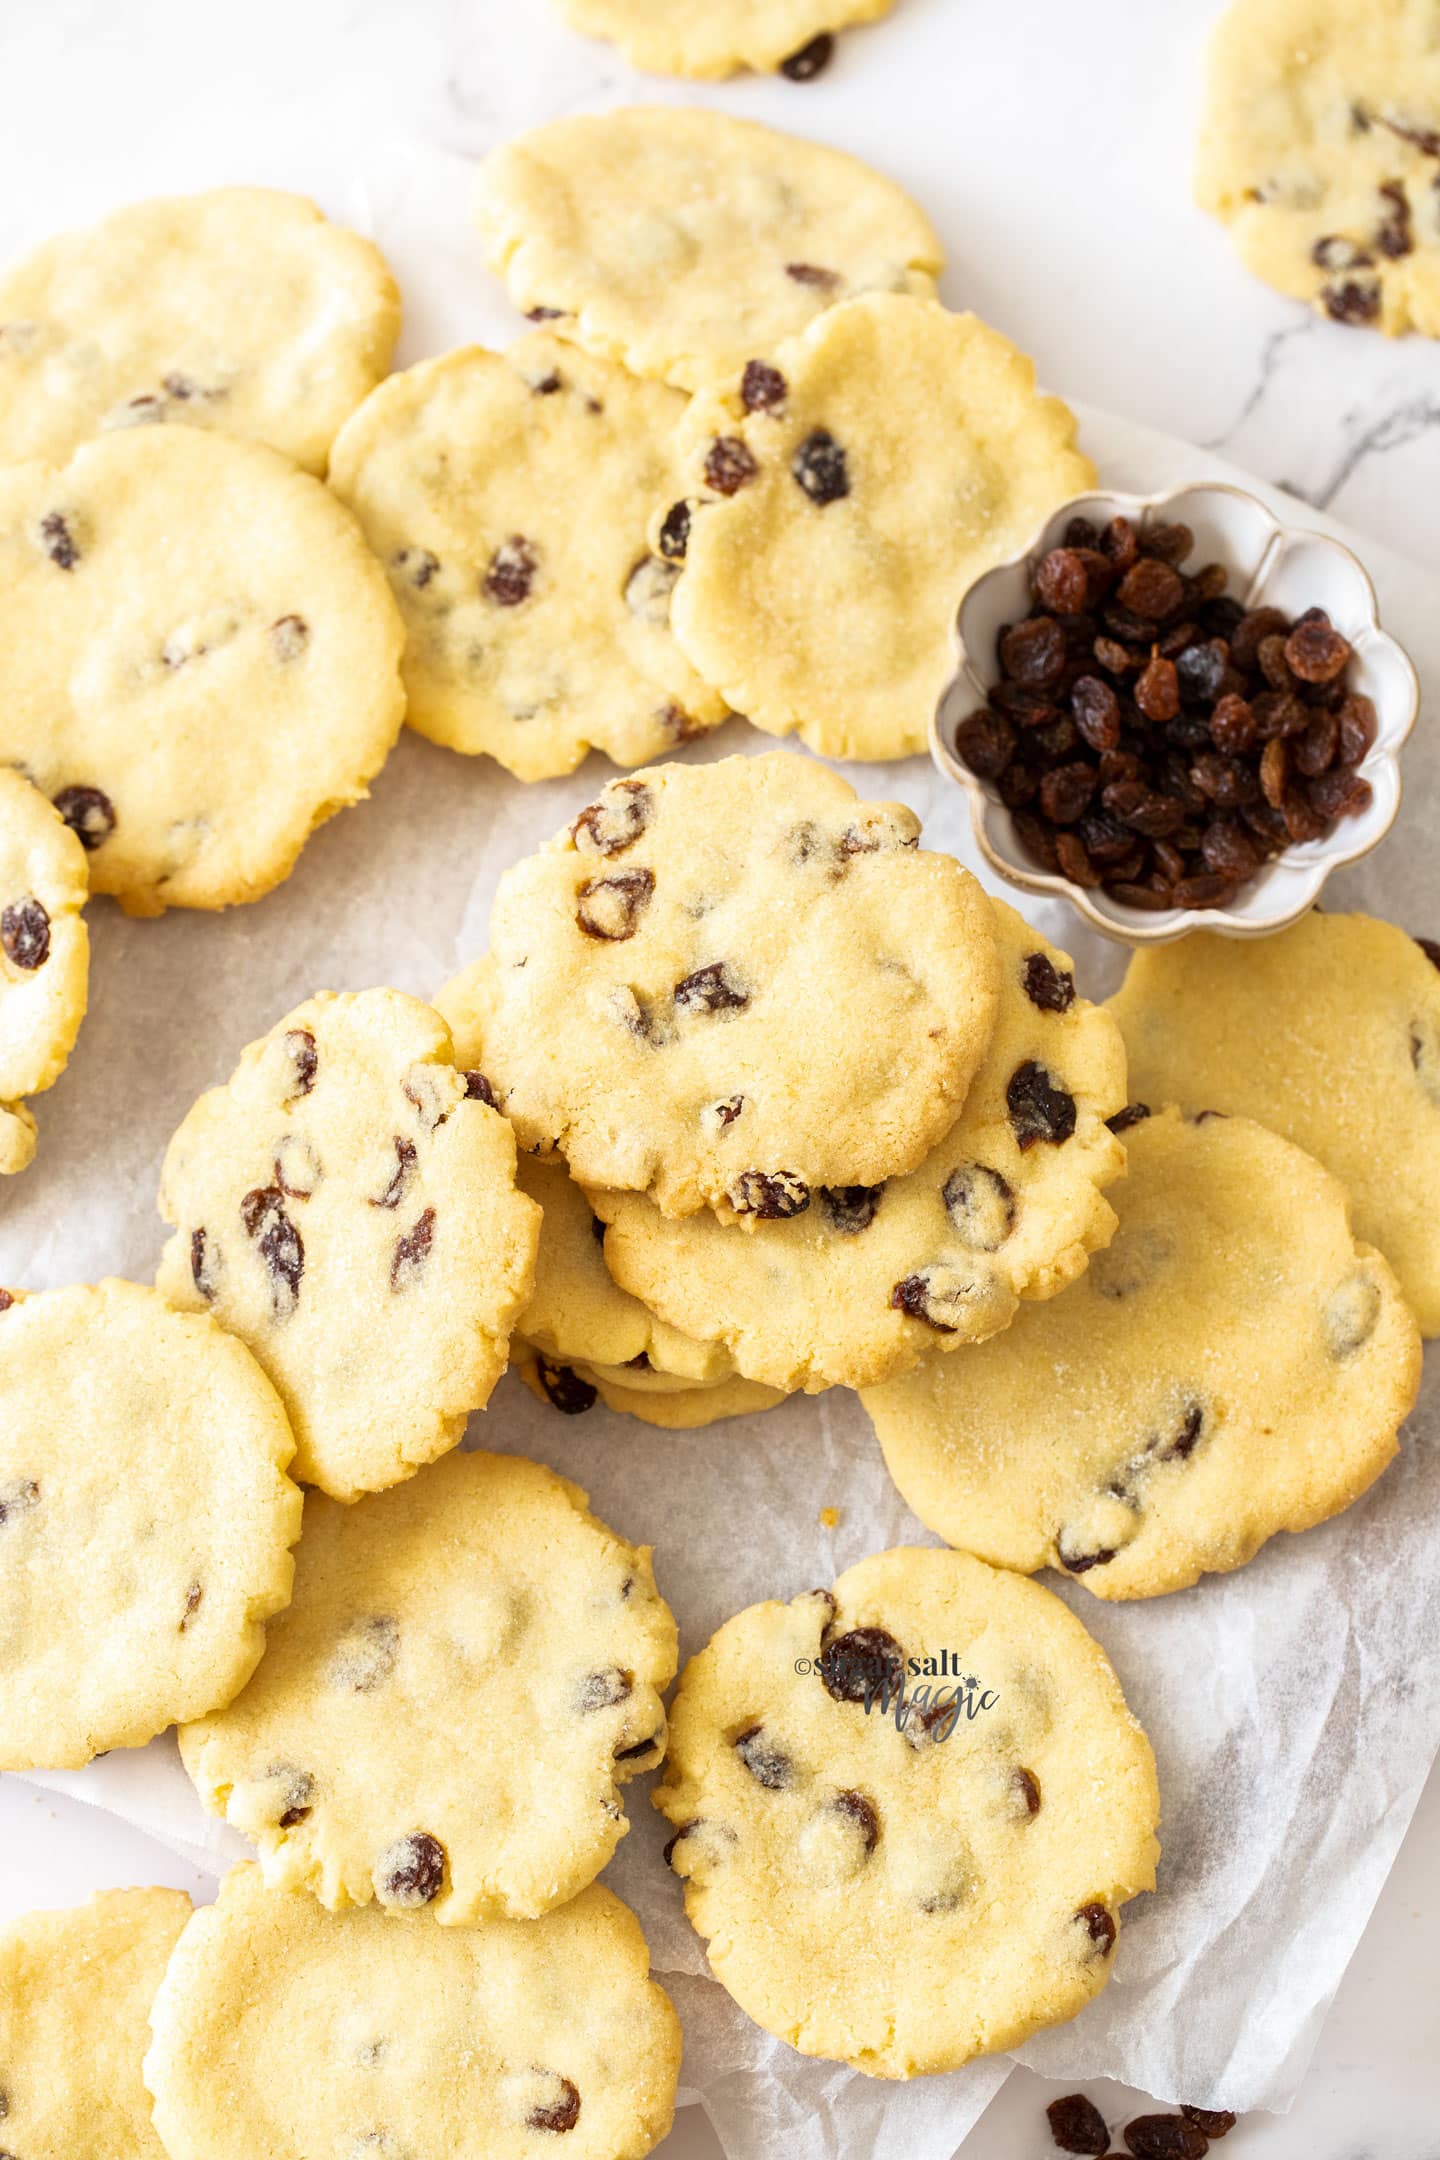 A pile of sultana filled cookies with a small bowl of sultanas.